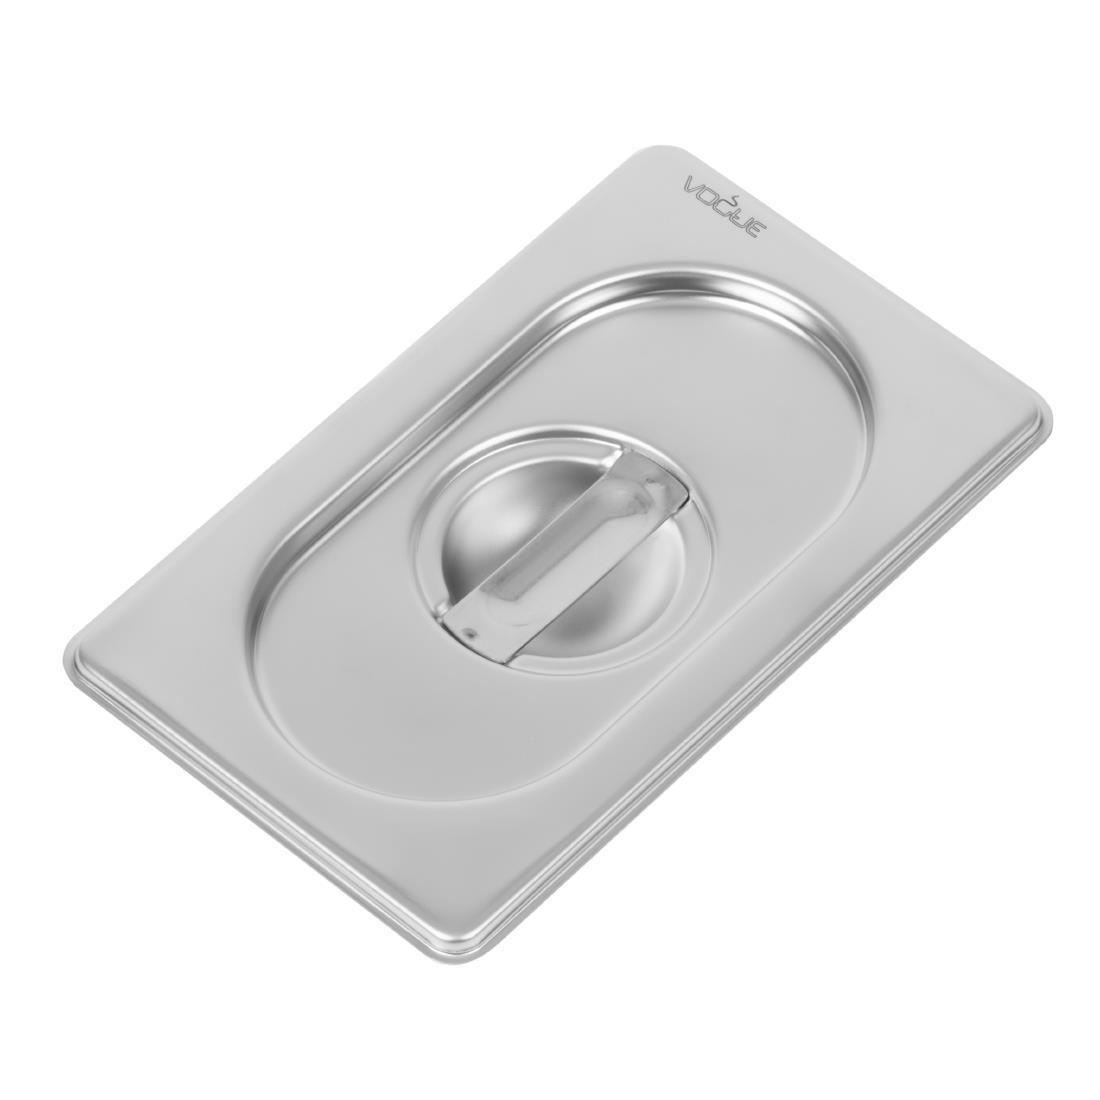 Vogue Heavy Duty Stainless Steel 1/9 Gastronorm Pan Lid - DW460  - 1